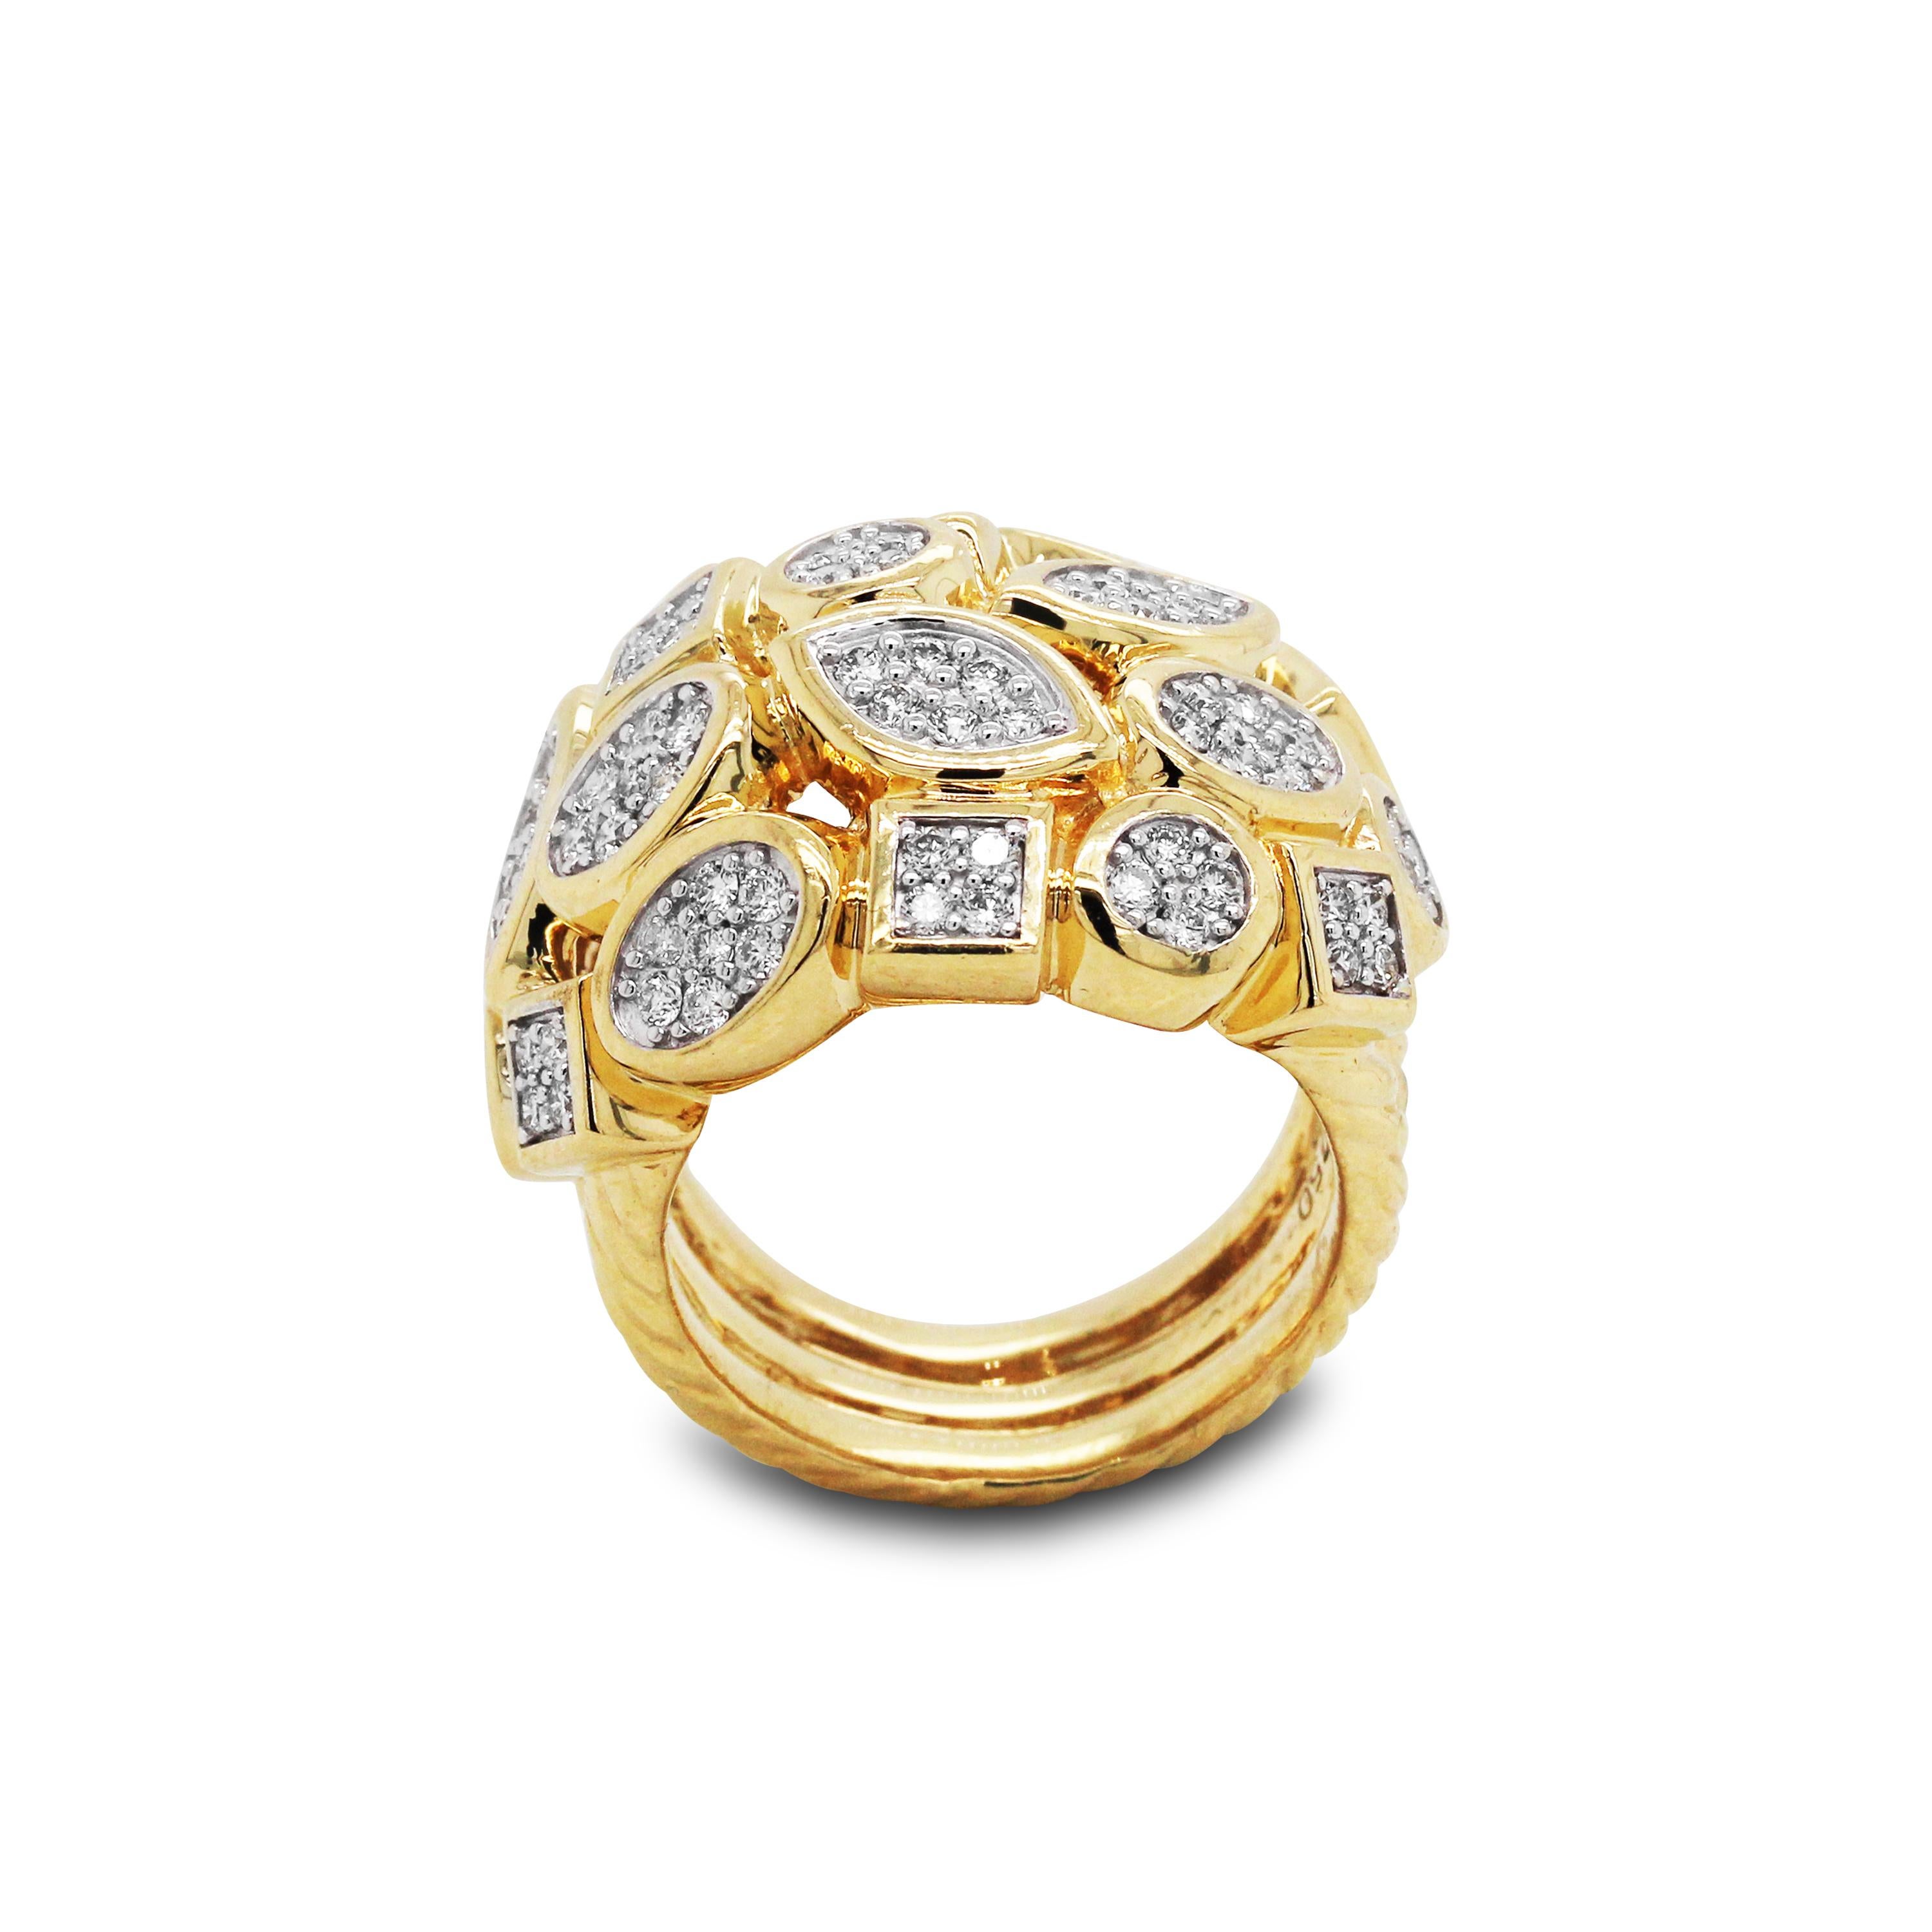 18K Yellow Gold and Diamond Cluster Ring

Beautiful hand made ring with unique design

1.40 carat diamonds total weight

Ring face is 0.80 inch width
0.45 inch band width

Ring is a size 7.5. Sizable.